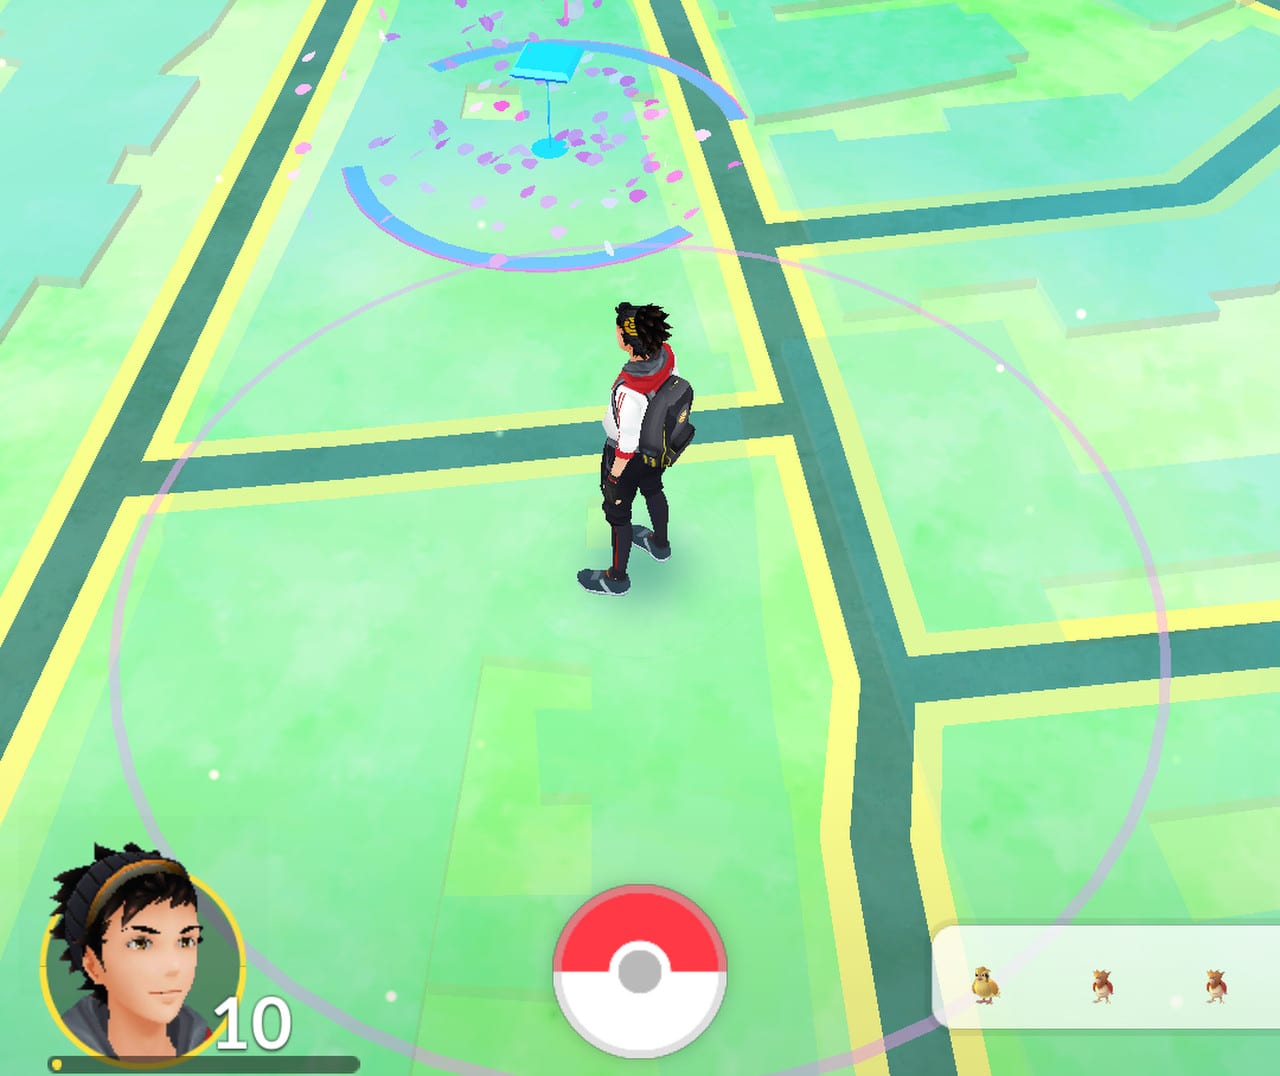 Pokemon Go Announce New Today View Feature During Covid-19 Pandemic.